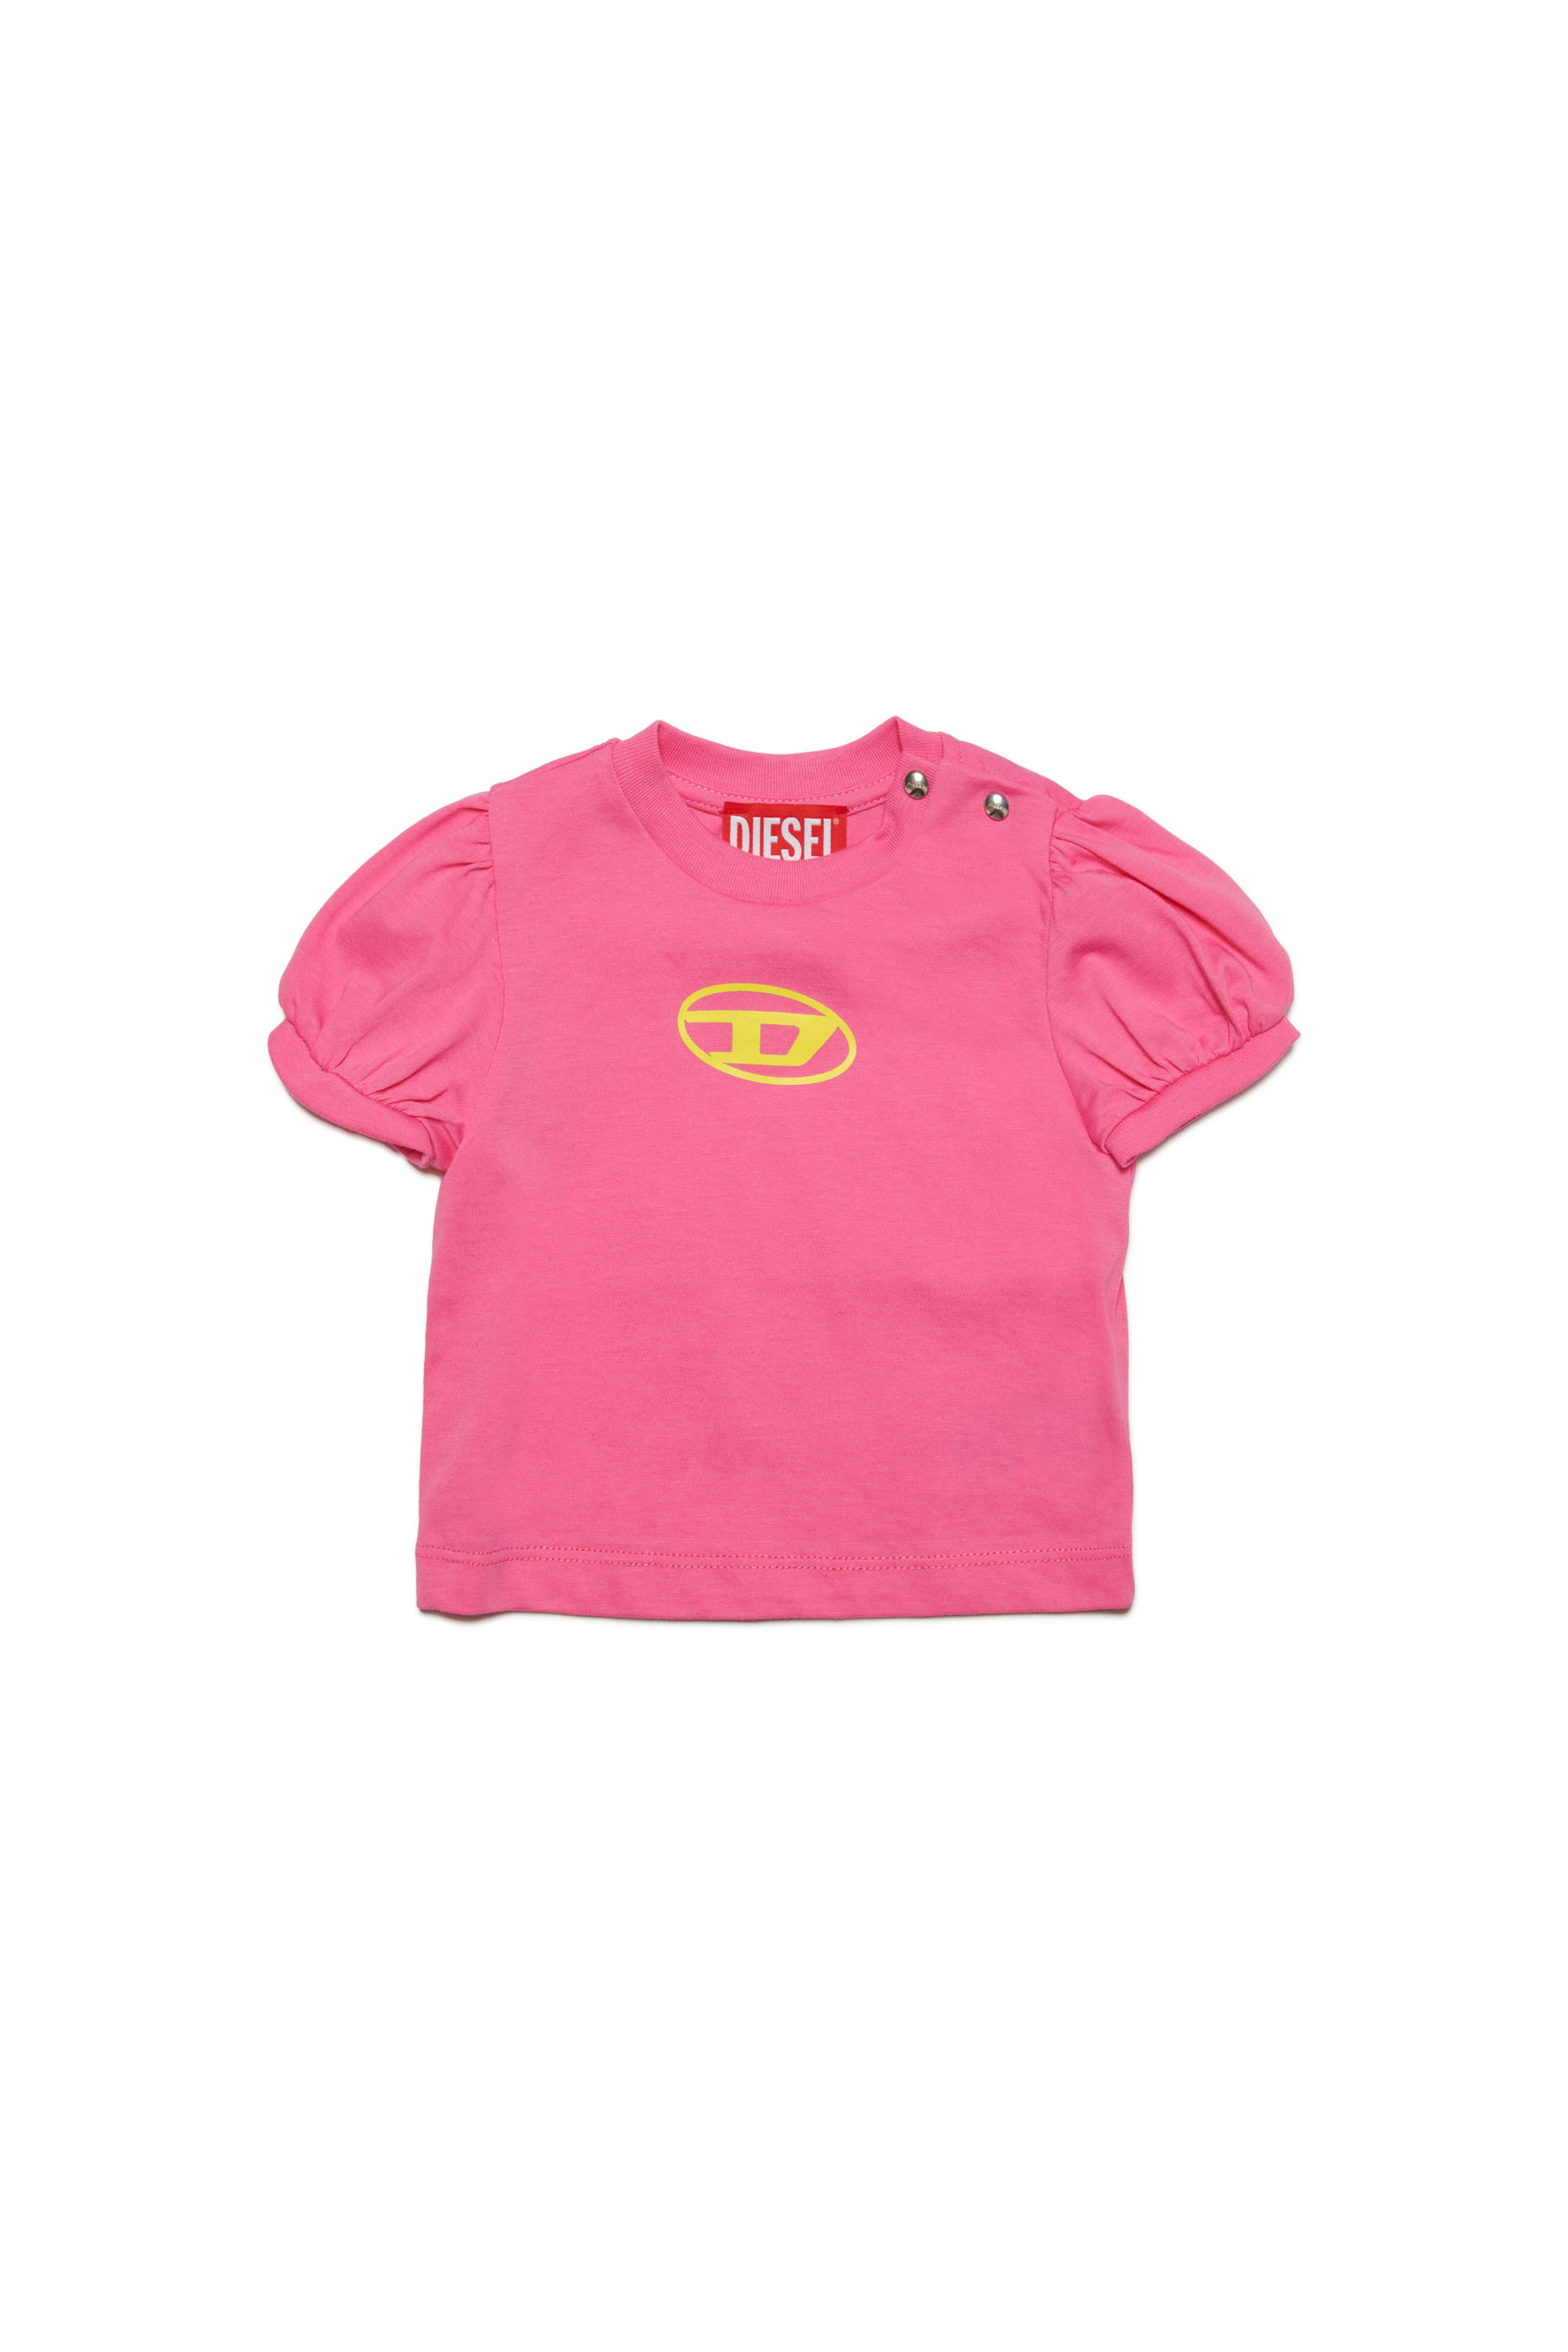 Diesel - Puff-sleeve T-shirt with Oval D - T-shirts and Tops - Woman - Pink